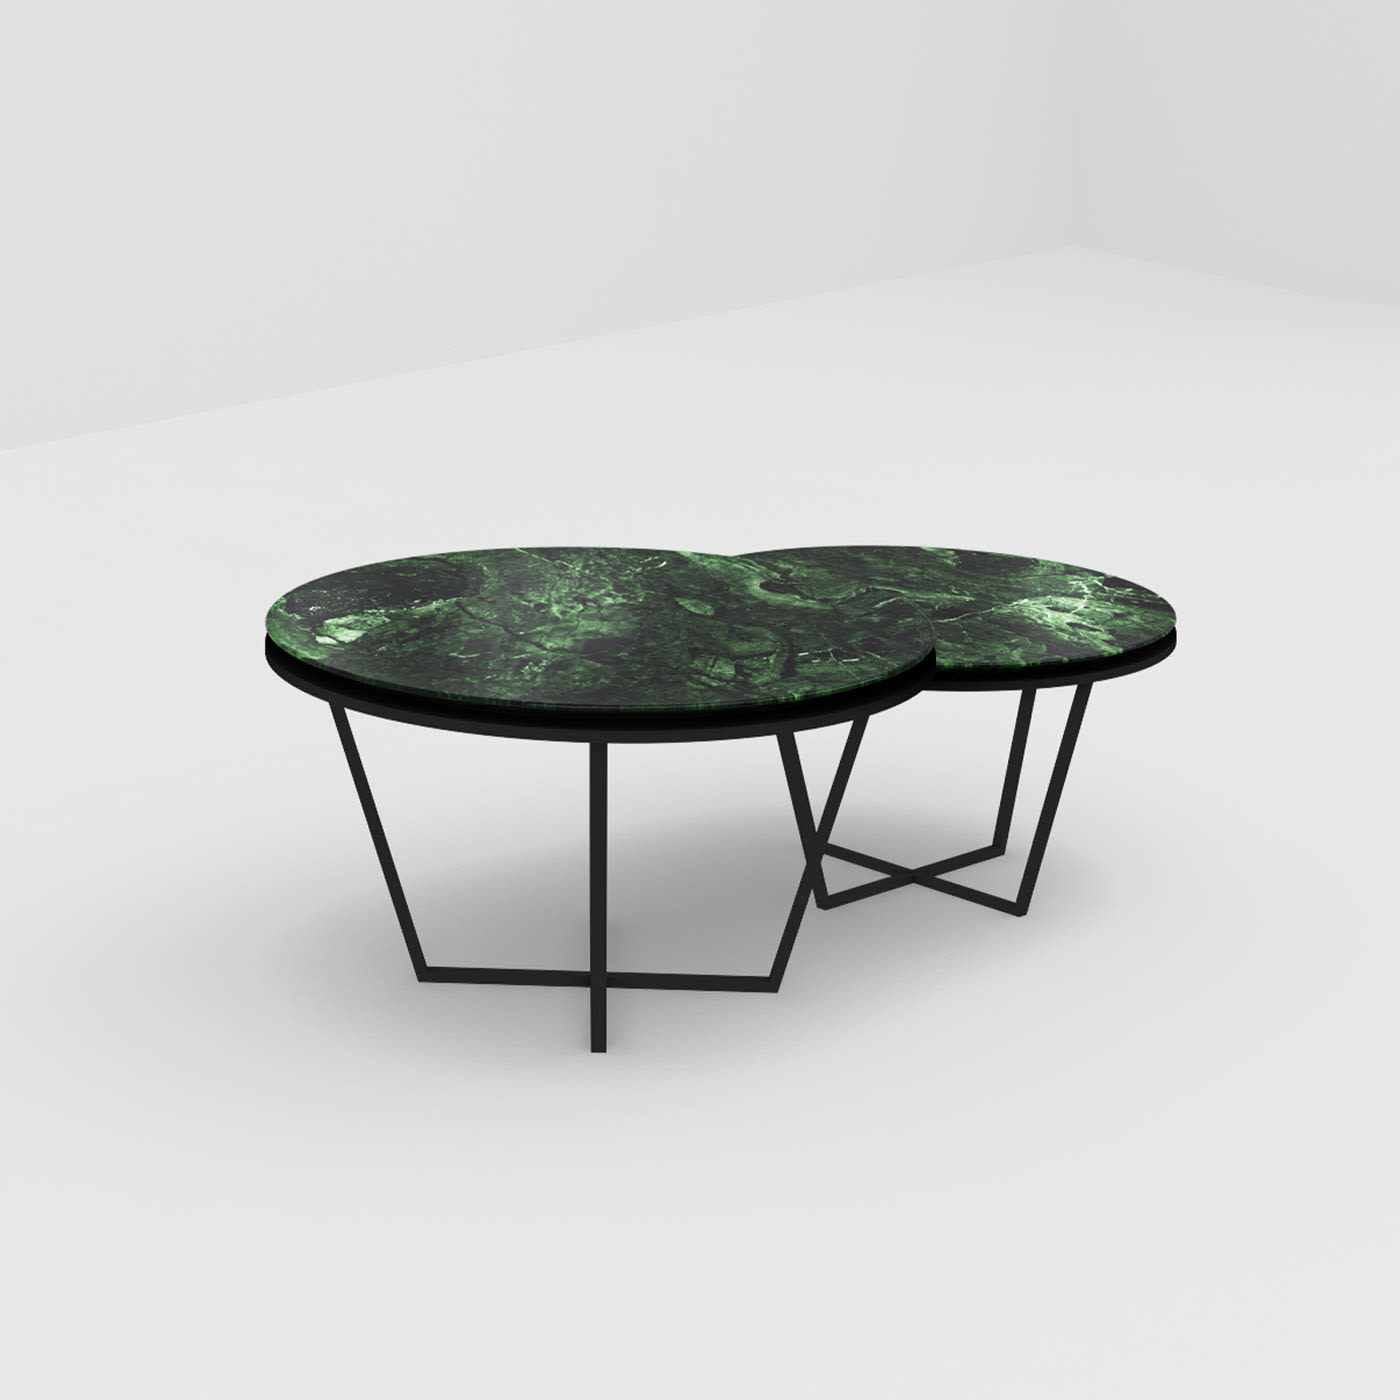 Set of 2 Different-Height Round Verde Alpi Marble Coffee Tables - D-Ita